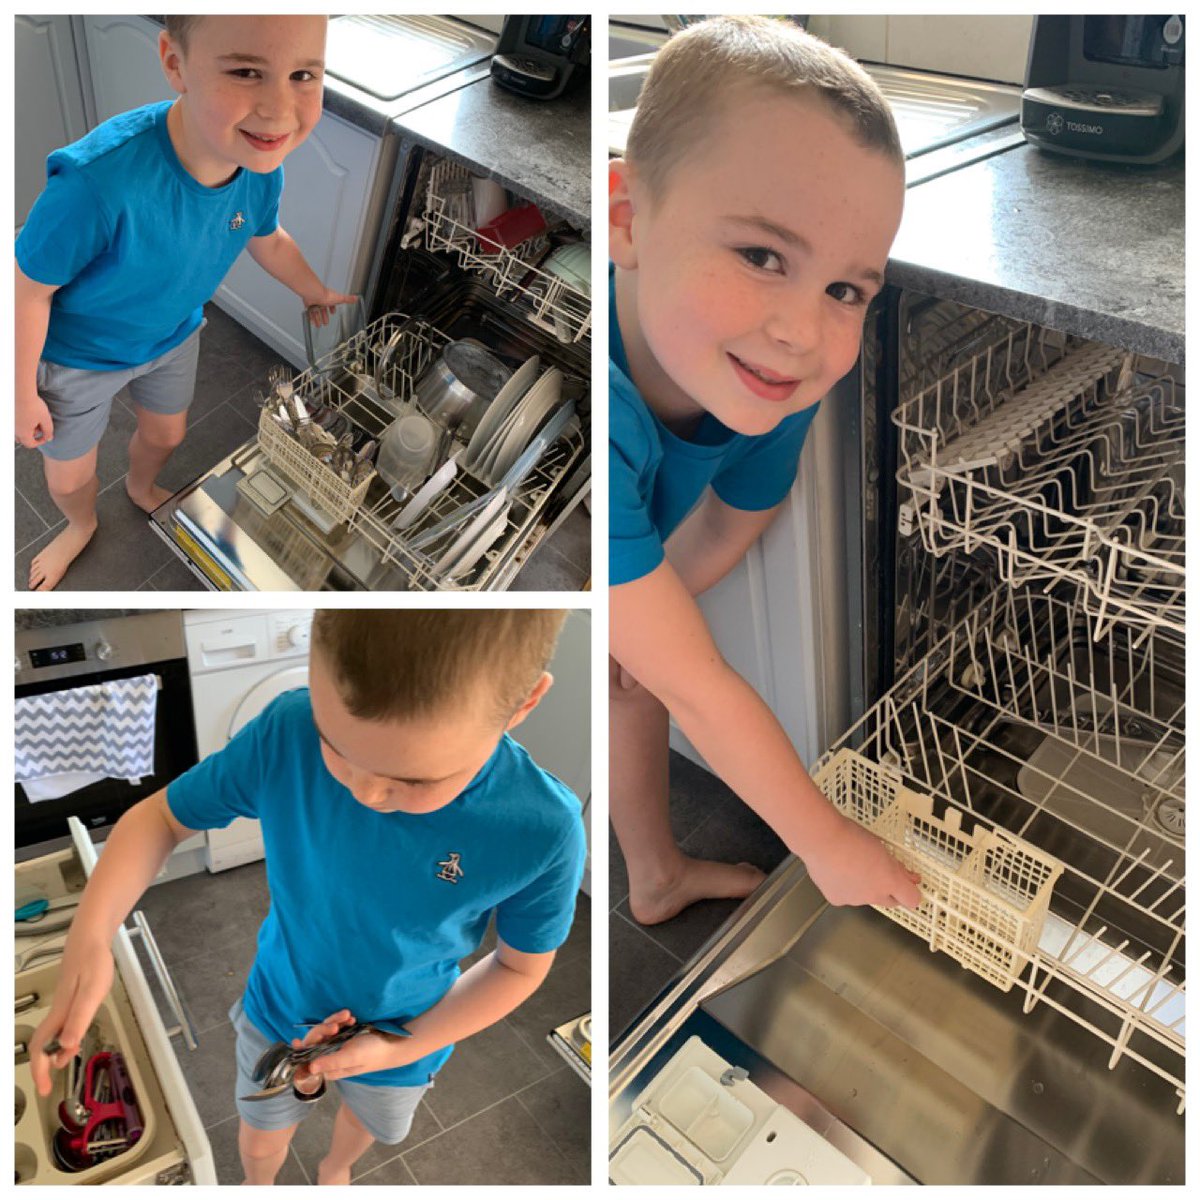 Harry helped out today with emptying the dishwasher. Fab job mate 👍🏻 @stjoes21 #7daykindnesschallenge #MentalHealthAwarenessWeek